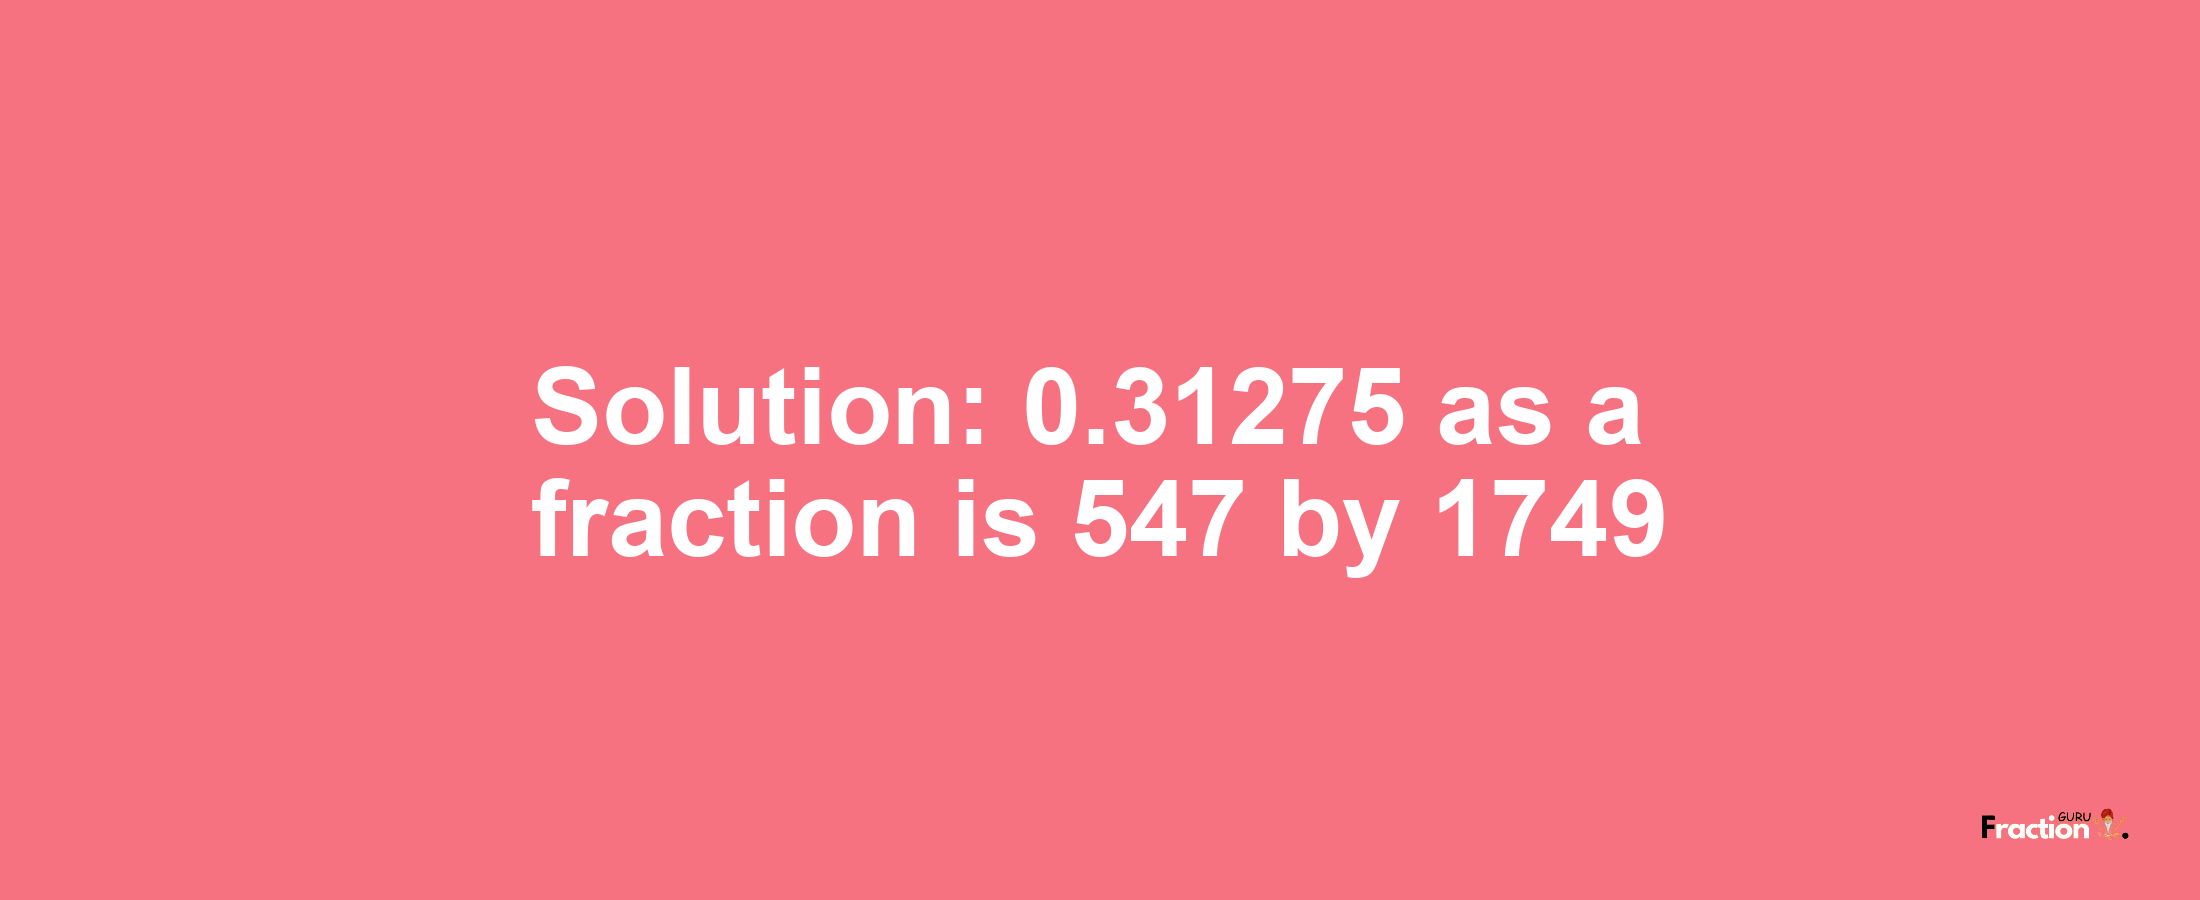 Solution:0.31275 as a fraction is 547/1749